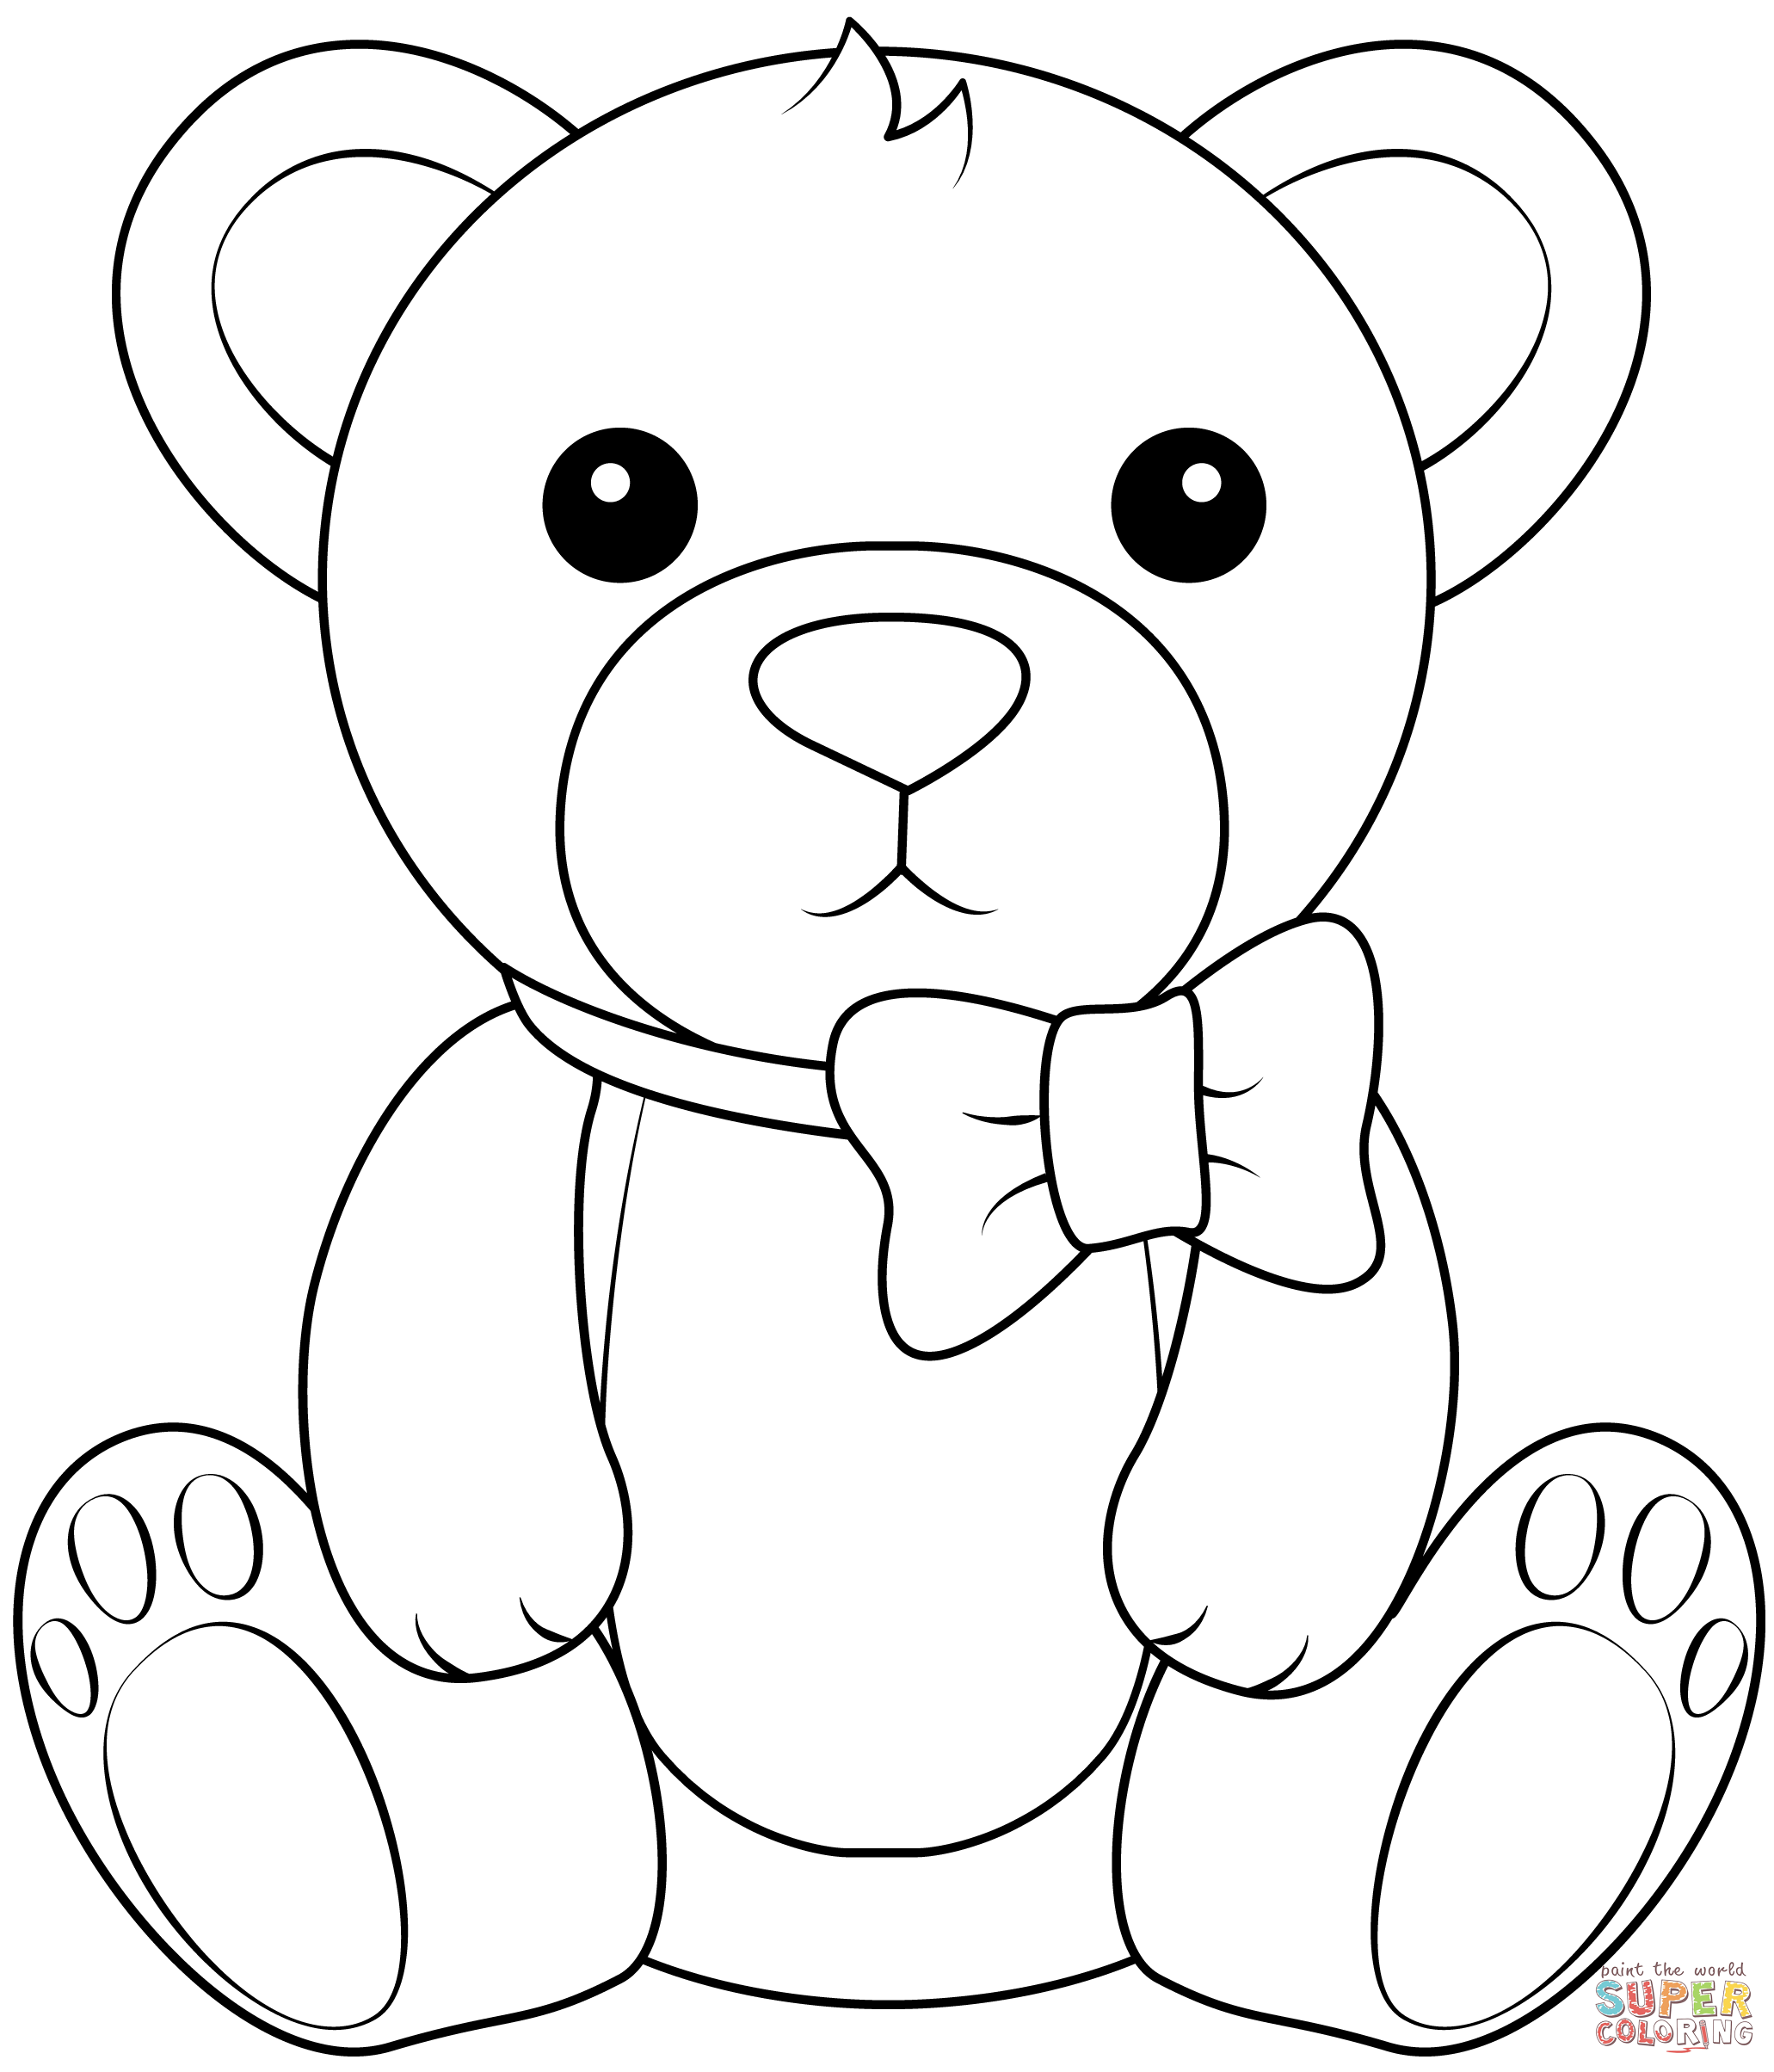 Teddy bear coloring page free printable coloring pages